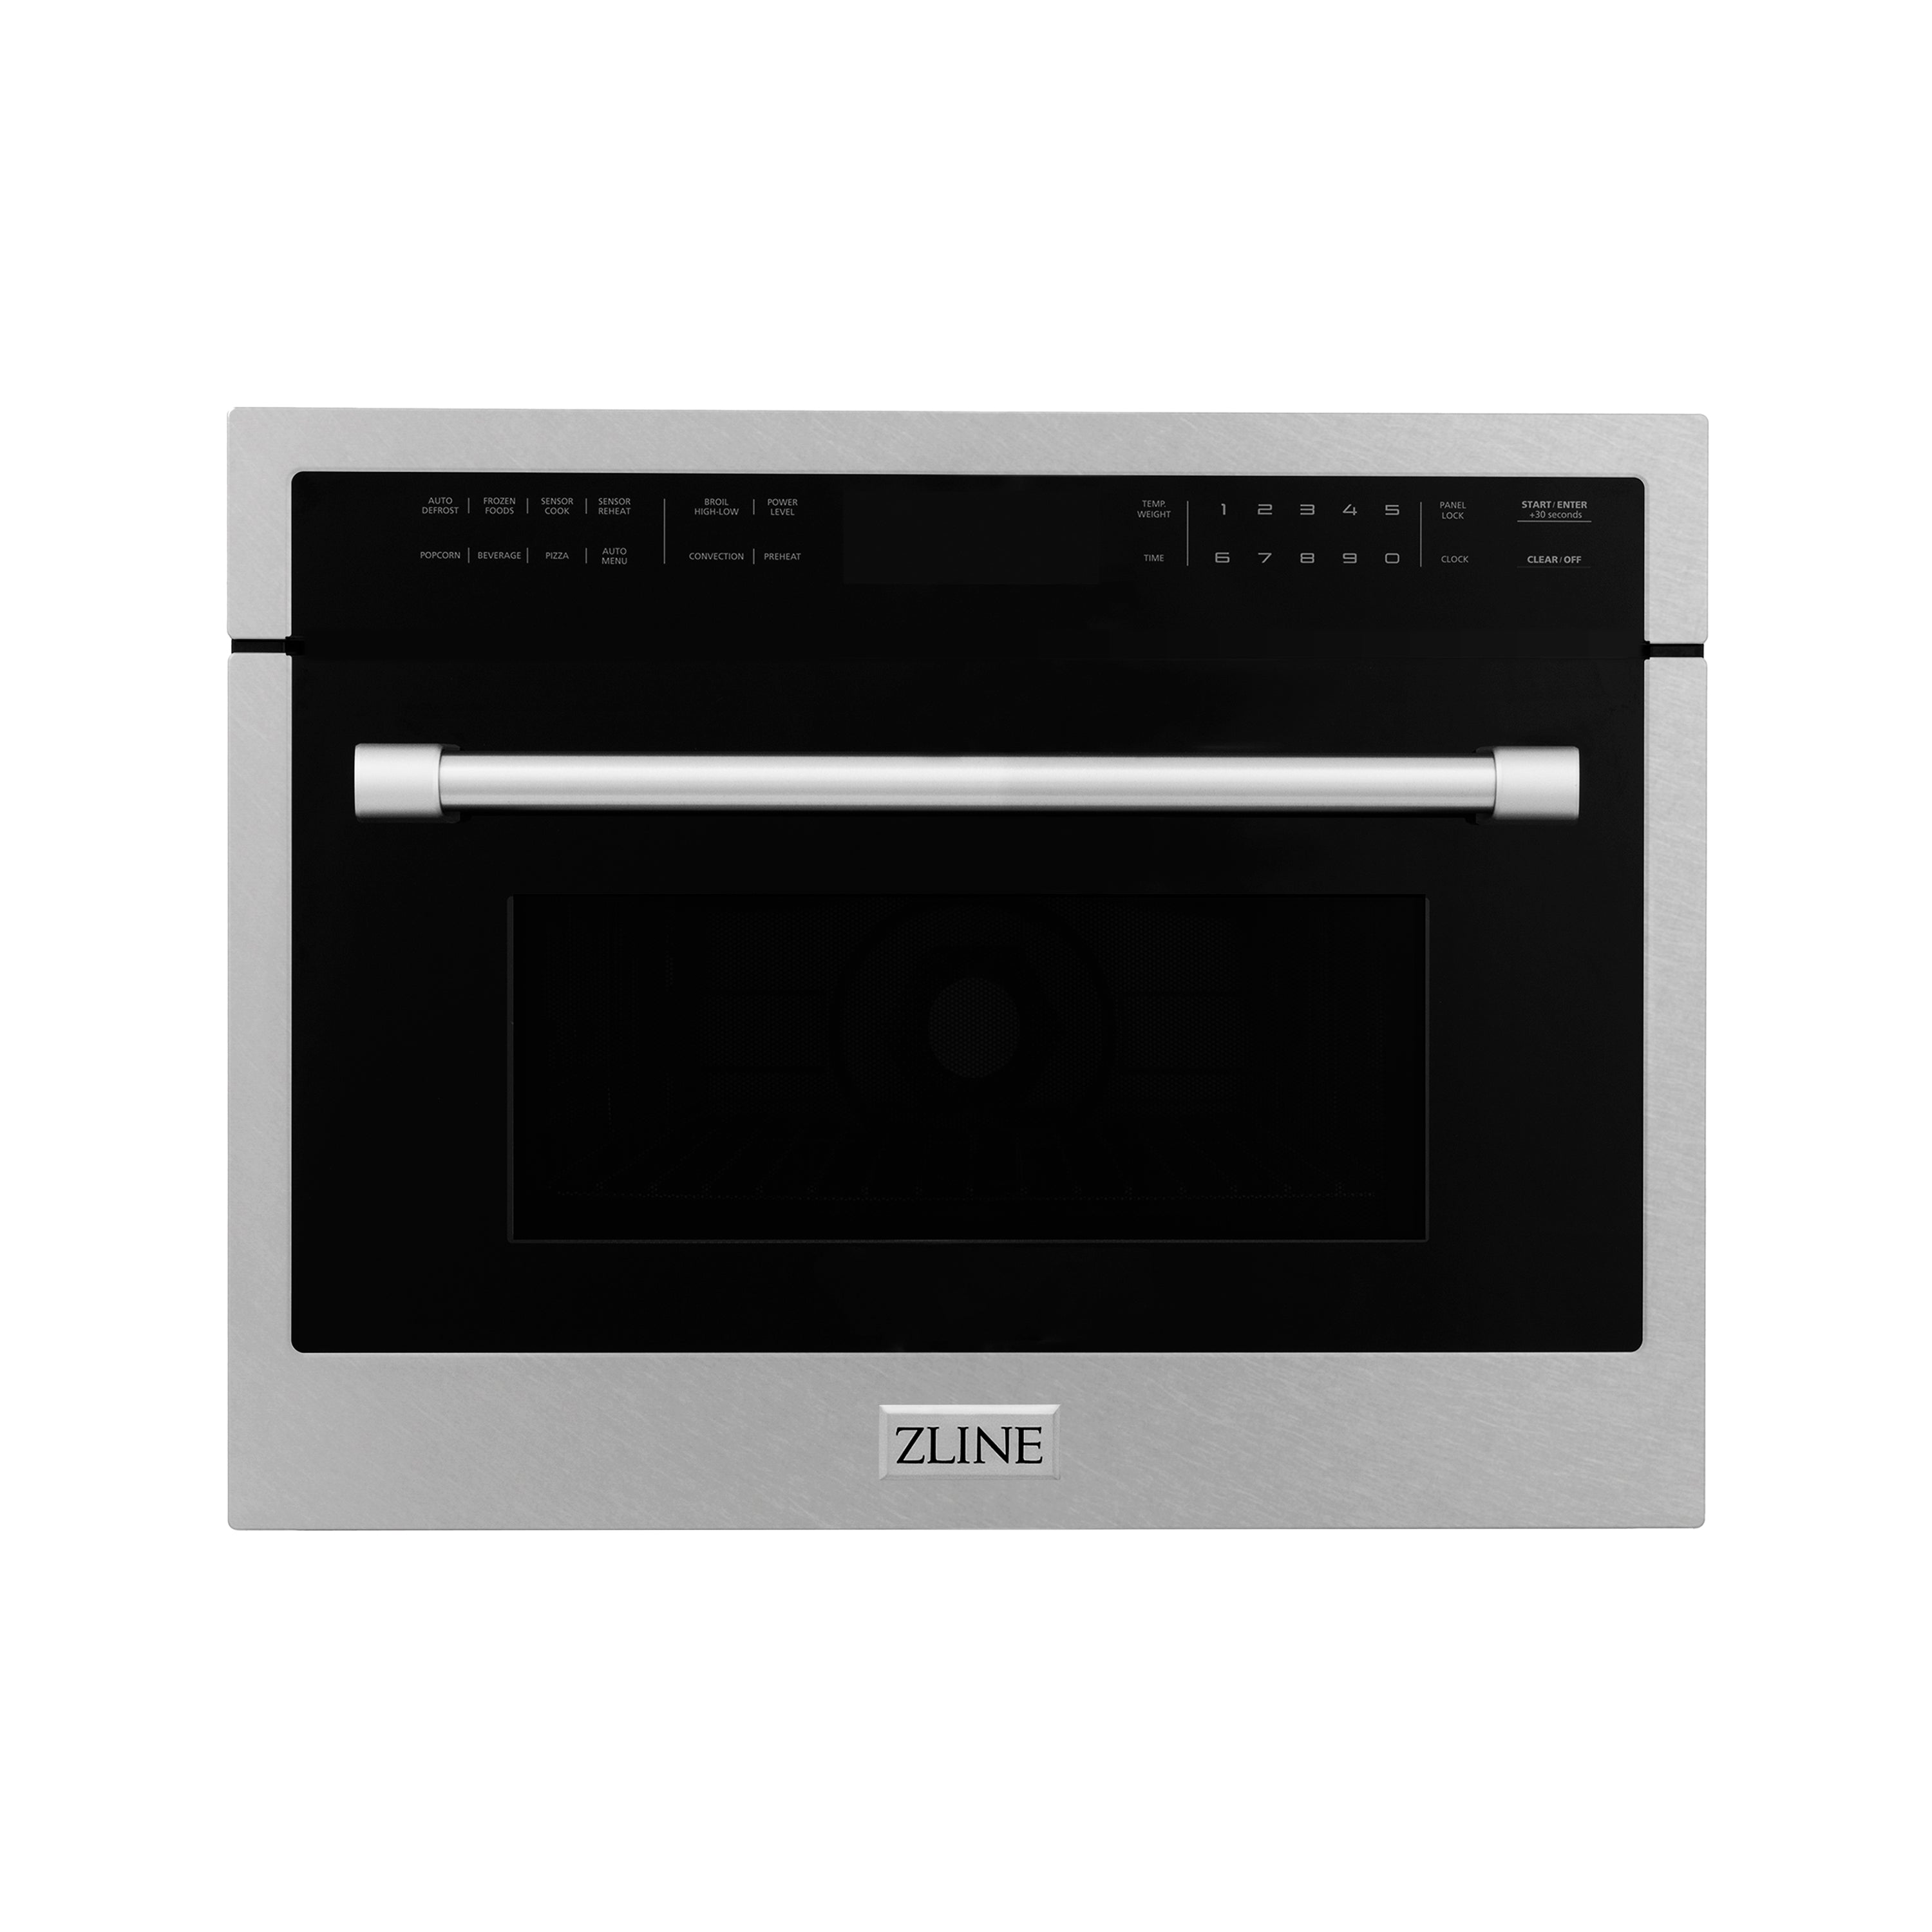 ZLINE 24 in. Built-in Convection Microwave Oven in Fingerprint Resistant DuraSnow Stainless Steel (MWO-24-SS) Front View Door Closed